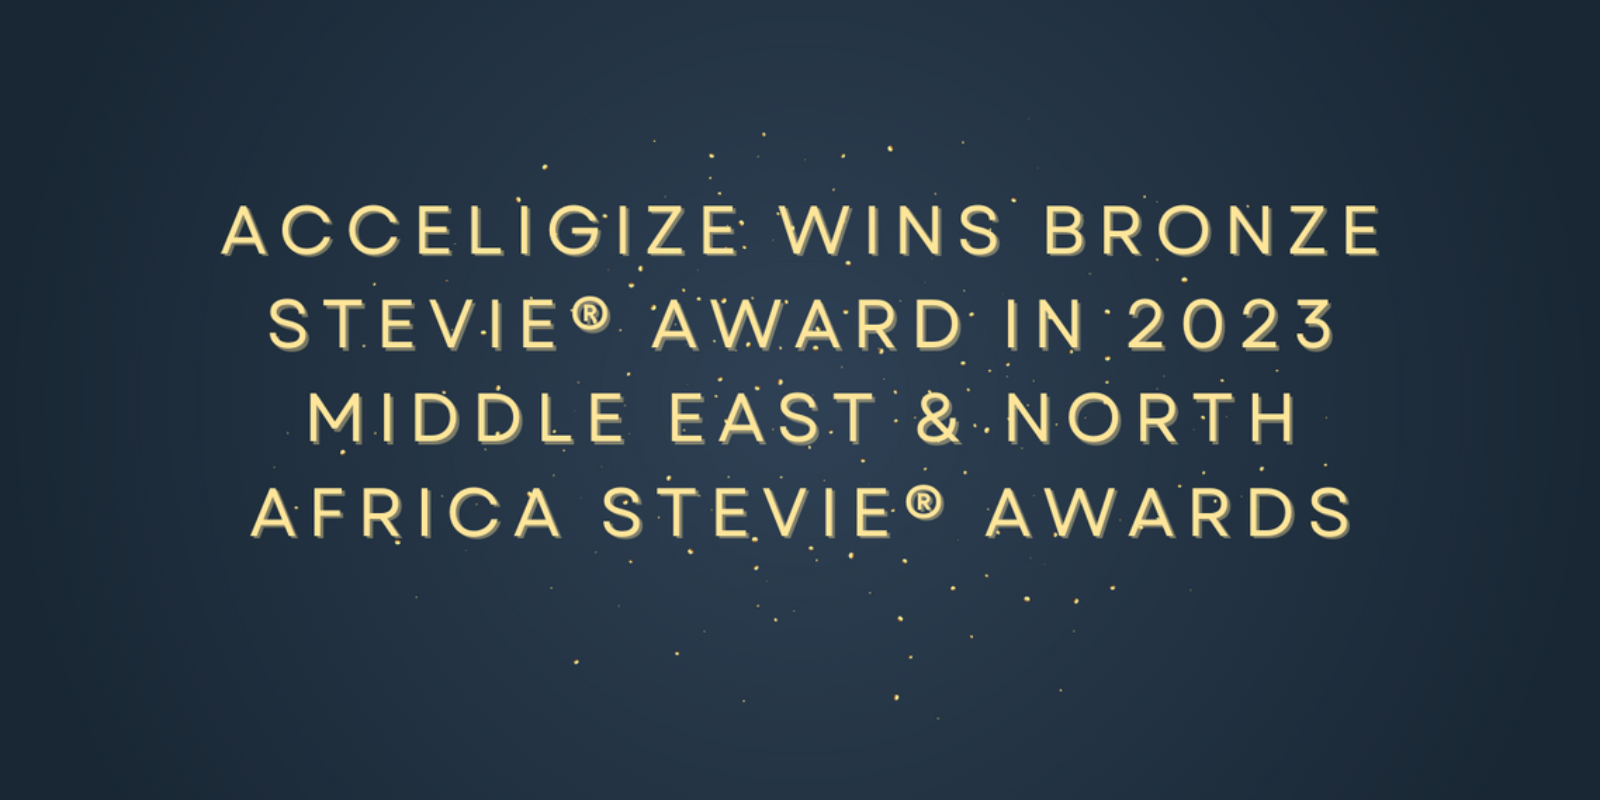 ACCELIGIZE WINS BRONZE STEVIE® AWARD IN 2023 MIDDLE EAST & NORTH AFRICA STEVIE® AWARDS